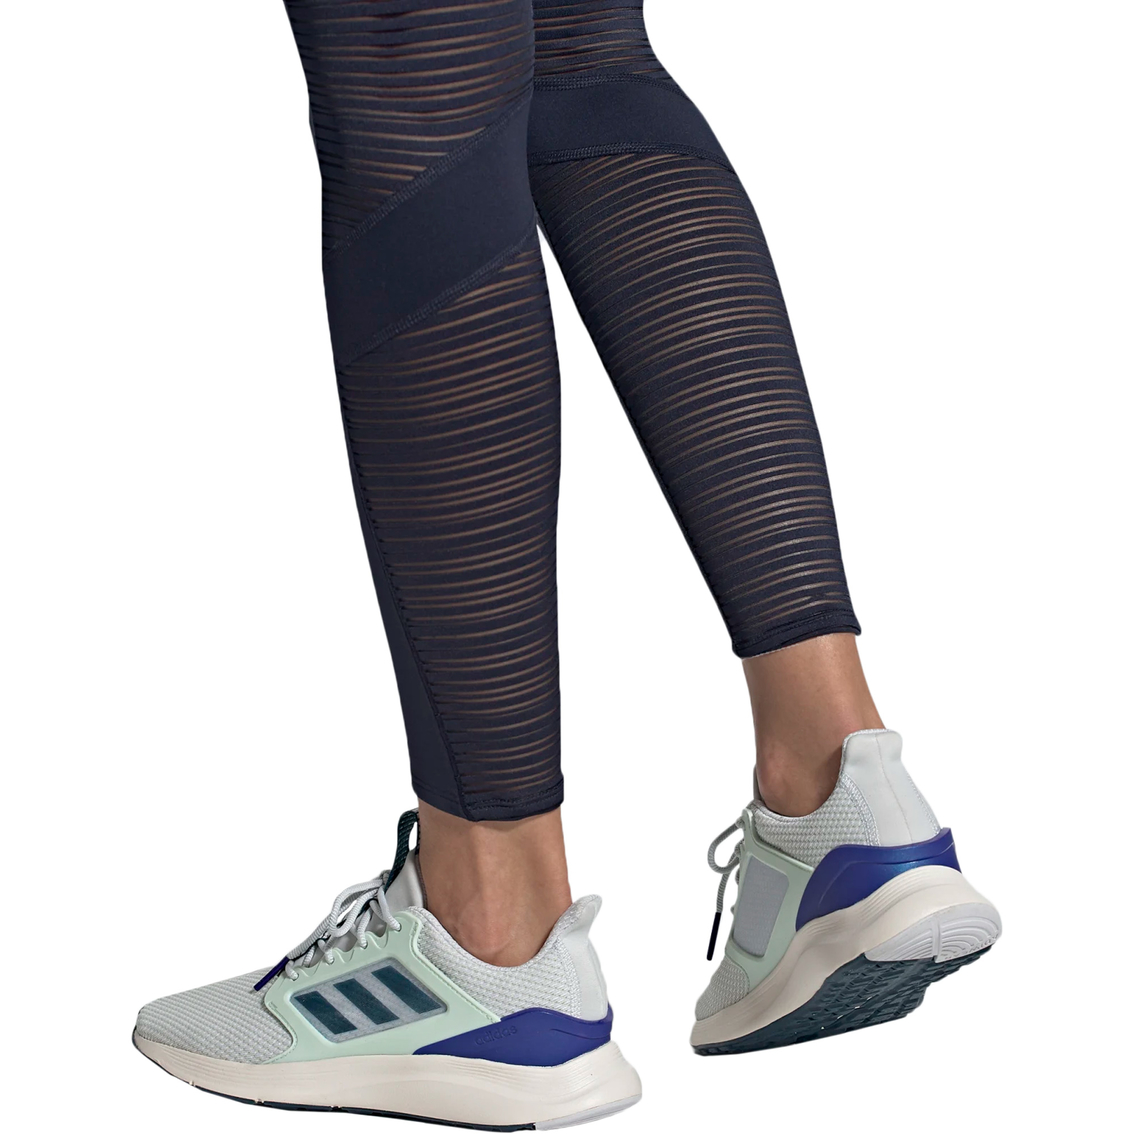 adidas Women's Energyfalcon X Running Shoes - Image 8 of 8